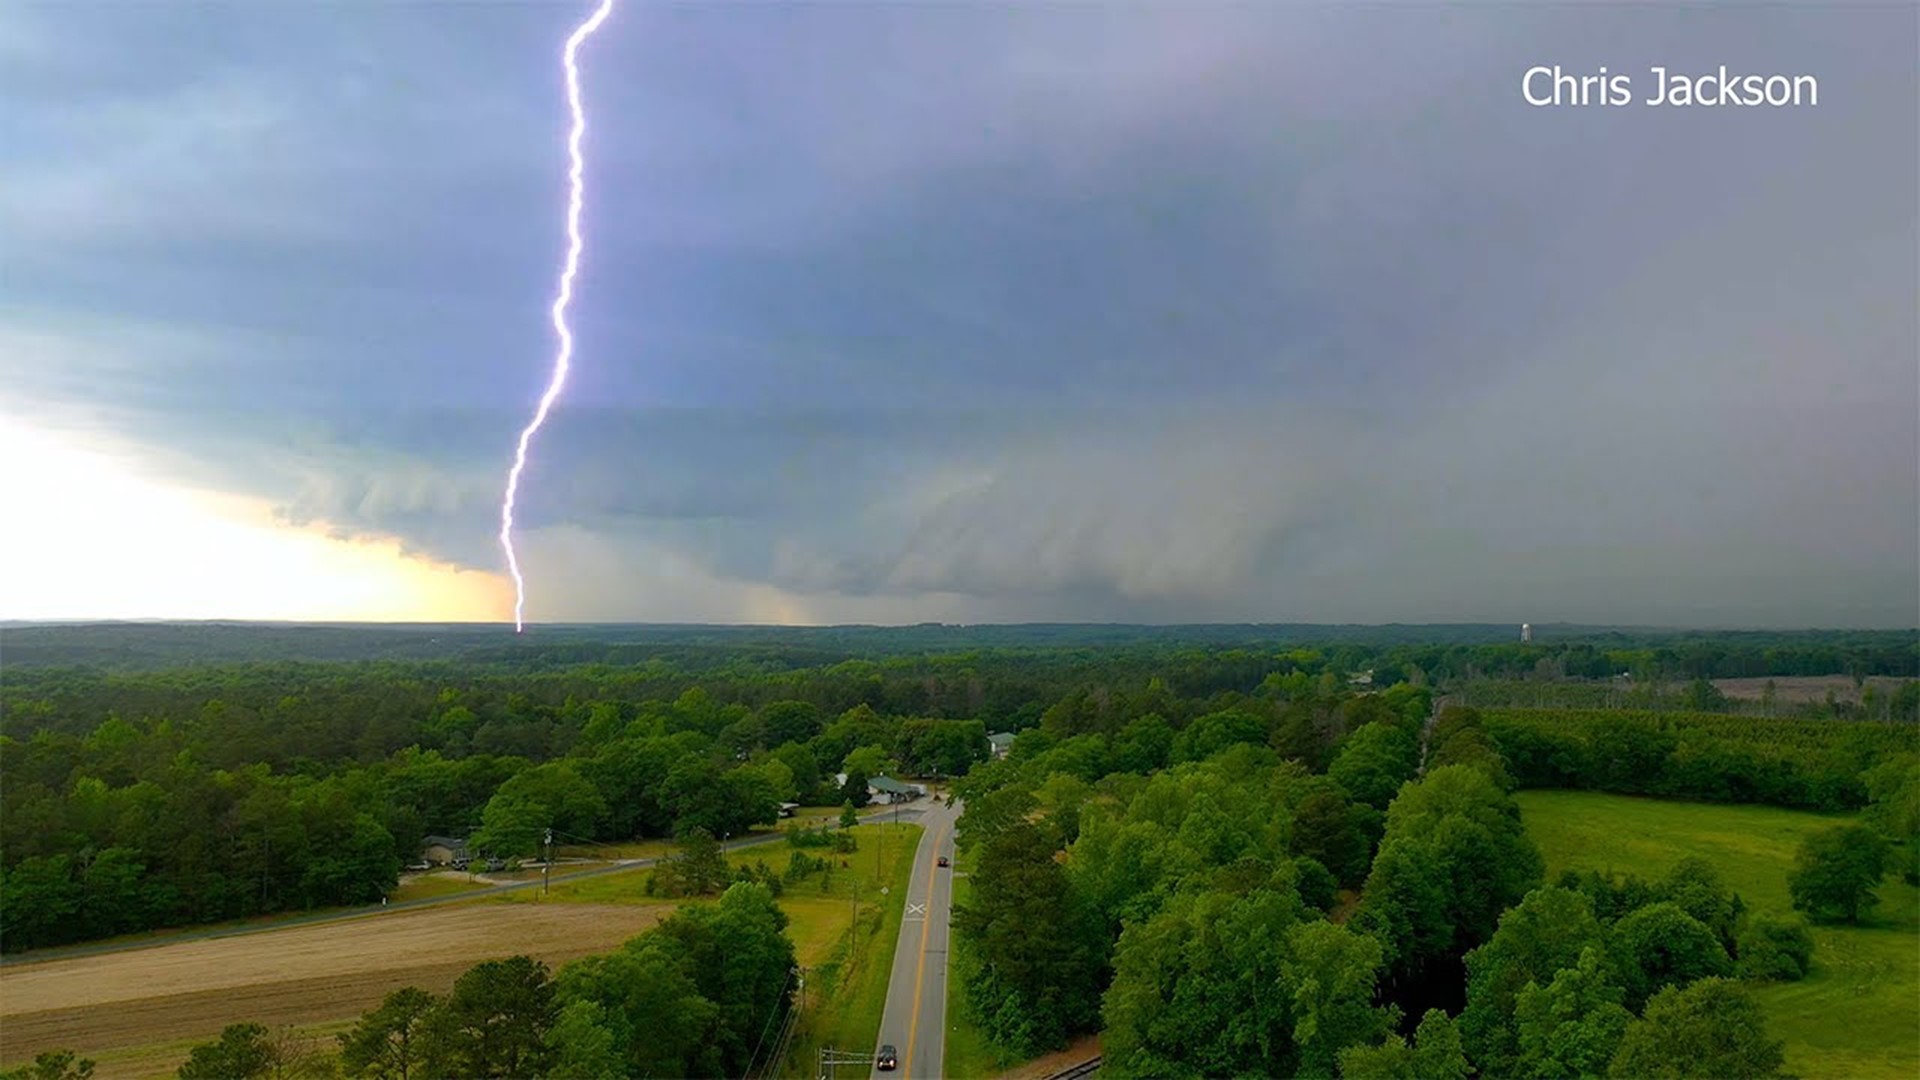 Aerial drone  video shows a tornadic thundestorm producing lightning and hail near Chester and Lancaster counties in South Carolina Tuesday.